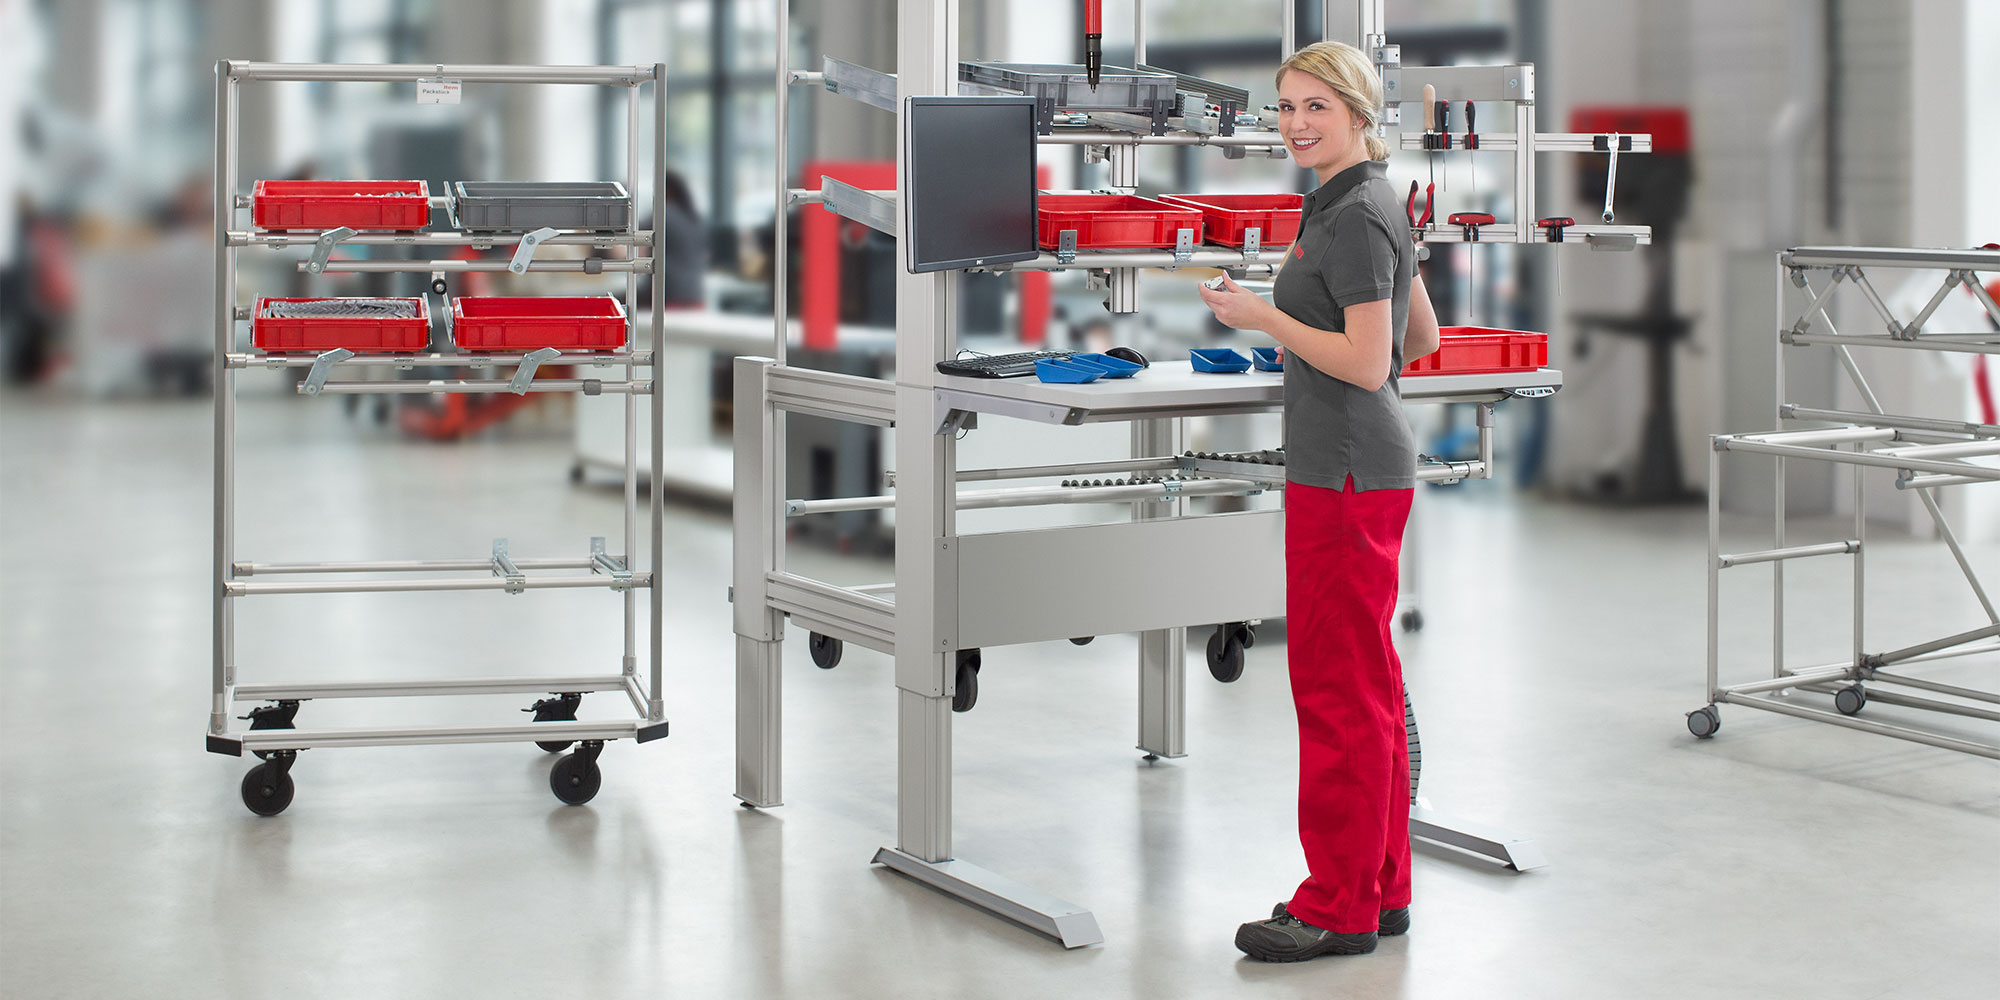 The 9 most commonly used ergonomic solutions in manual production